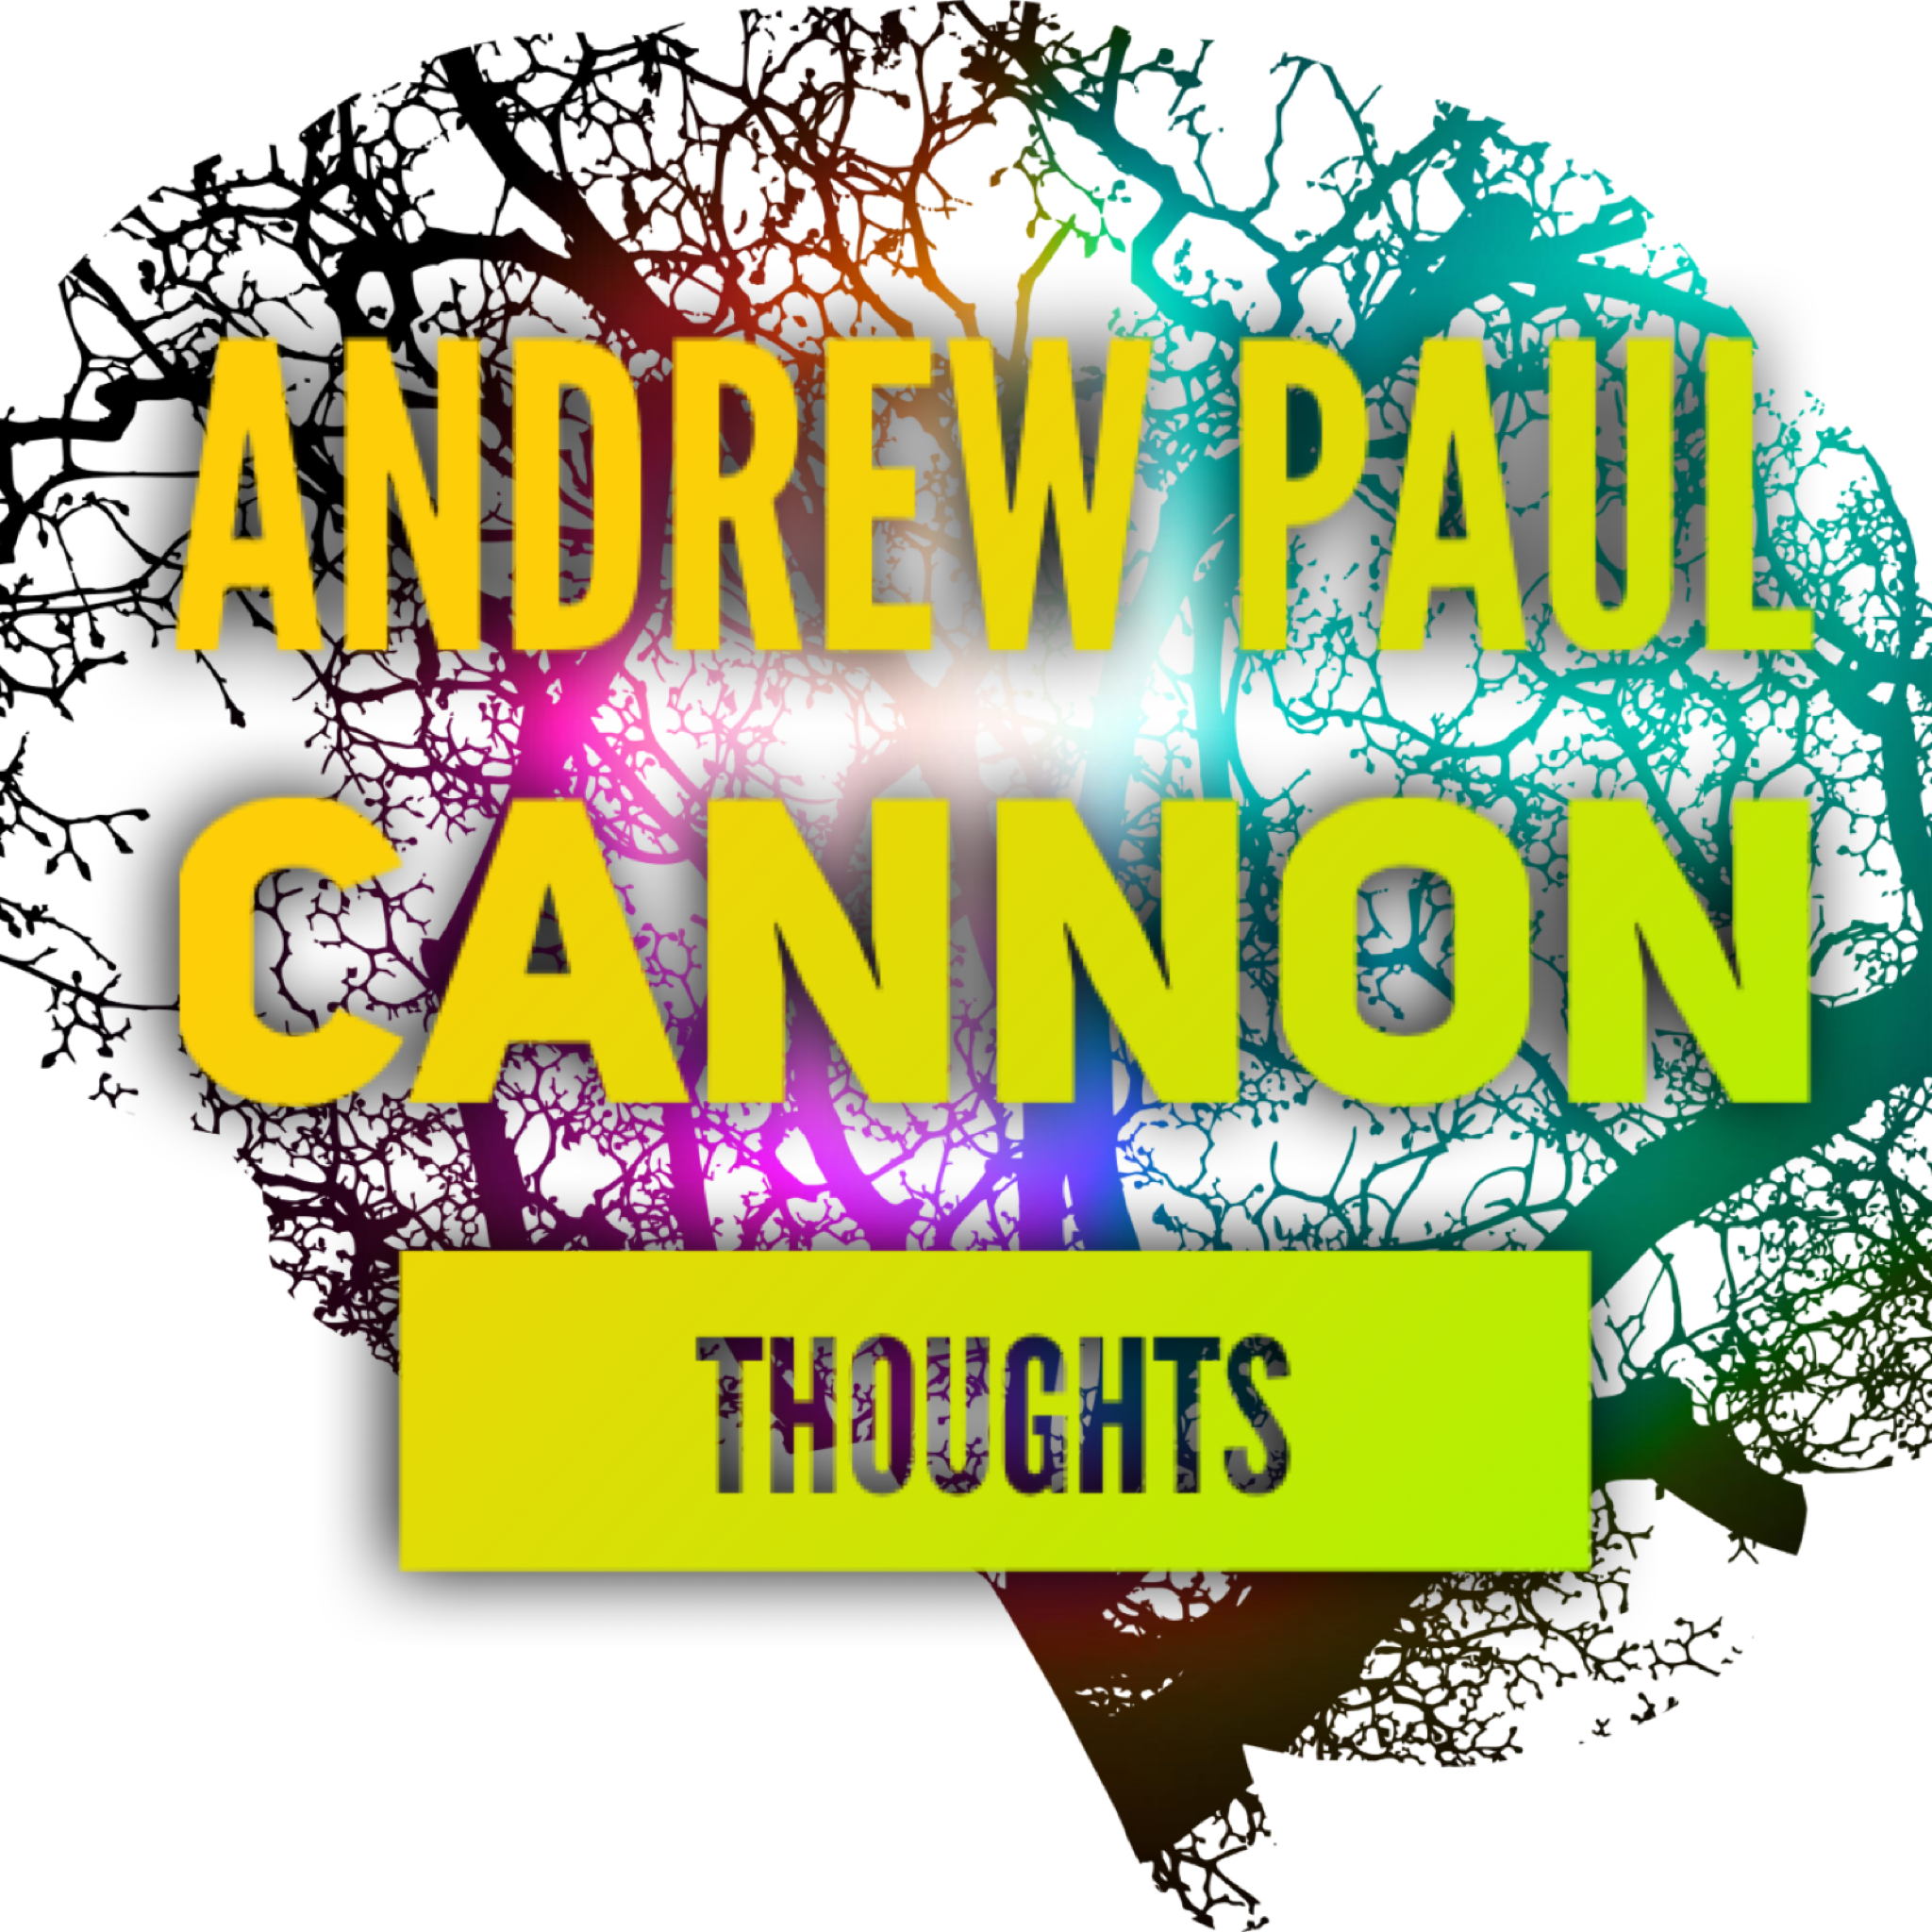 Andrew Paul Cannon: Thoughts